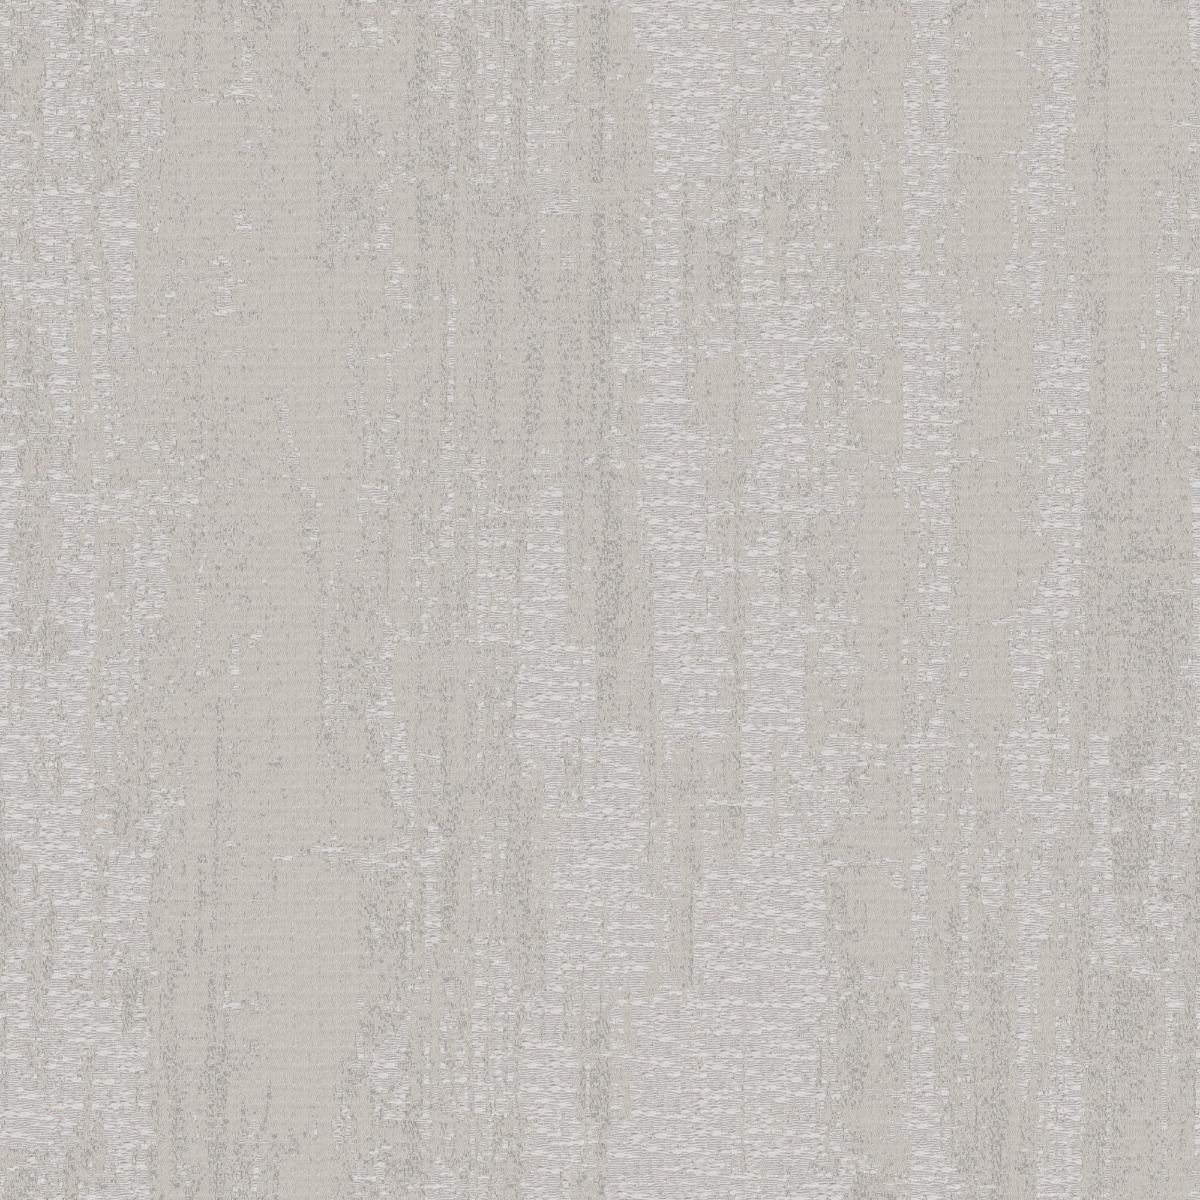 A seamless fabric texture with graphical grey jacquard units arranged in a None pattern